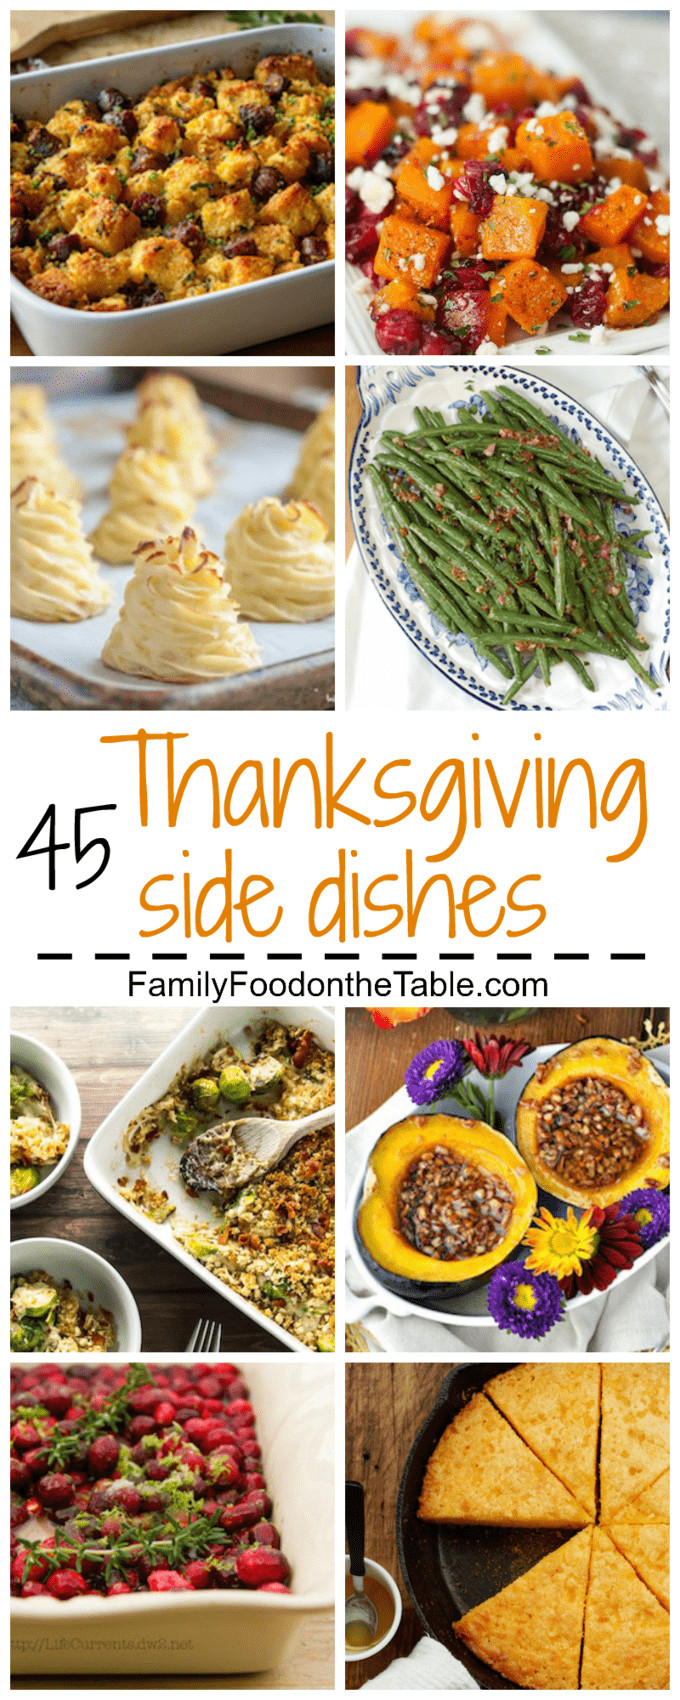 Thanksgiving Recipes Side Dishes
 45 Thanksgiving side dishes recipe round up Family